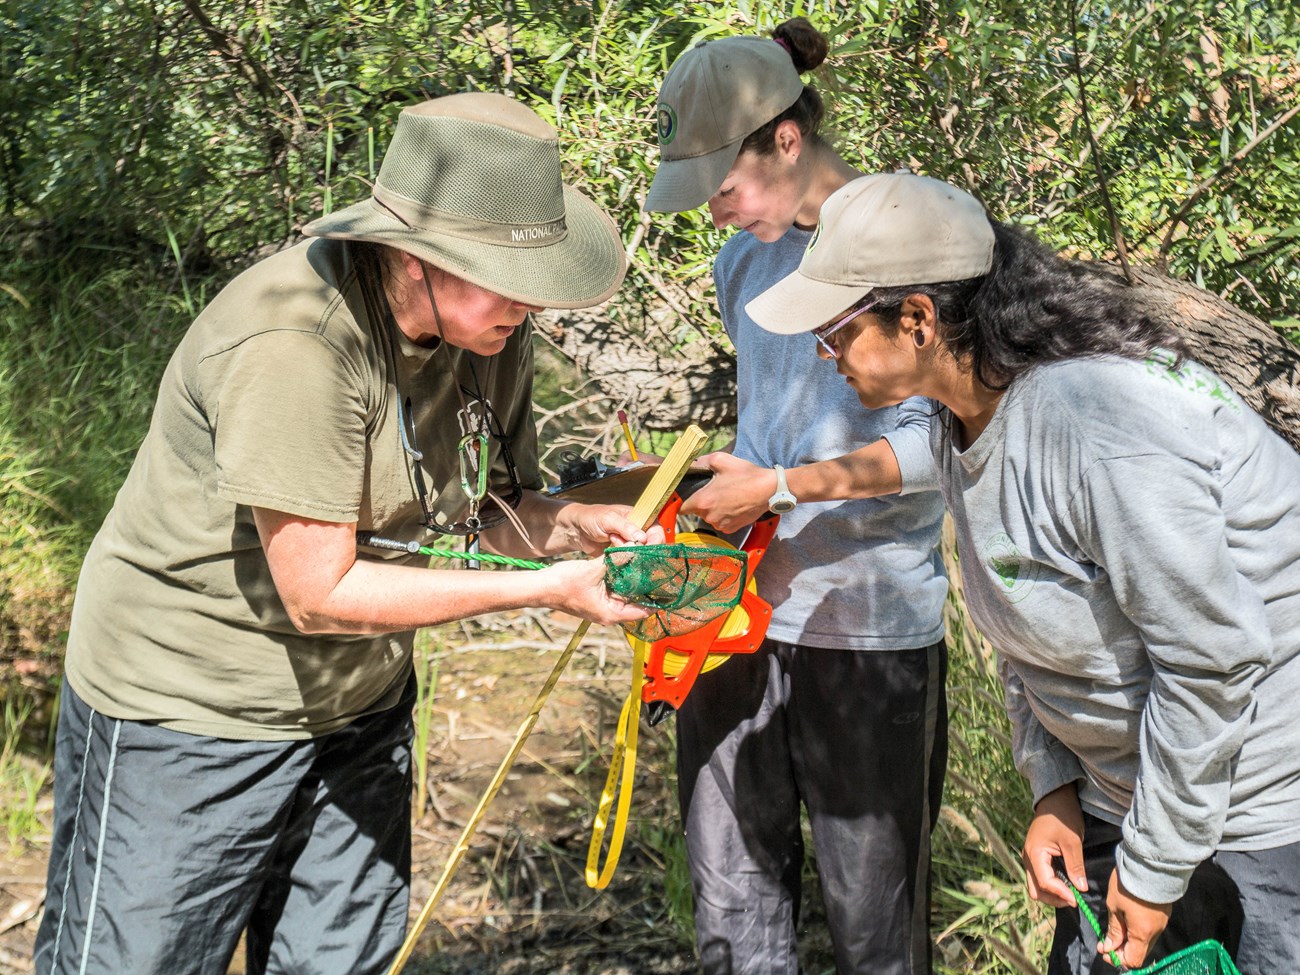 Katy and two interns examine the contents of a green dip net and record data during a stream survey.